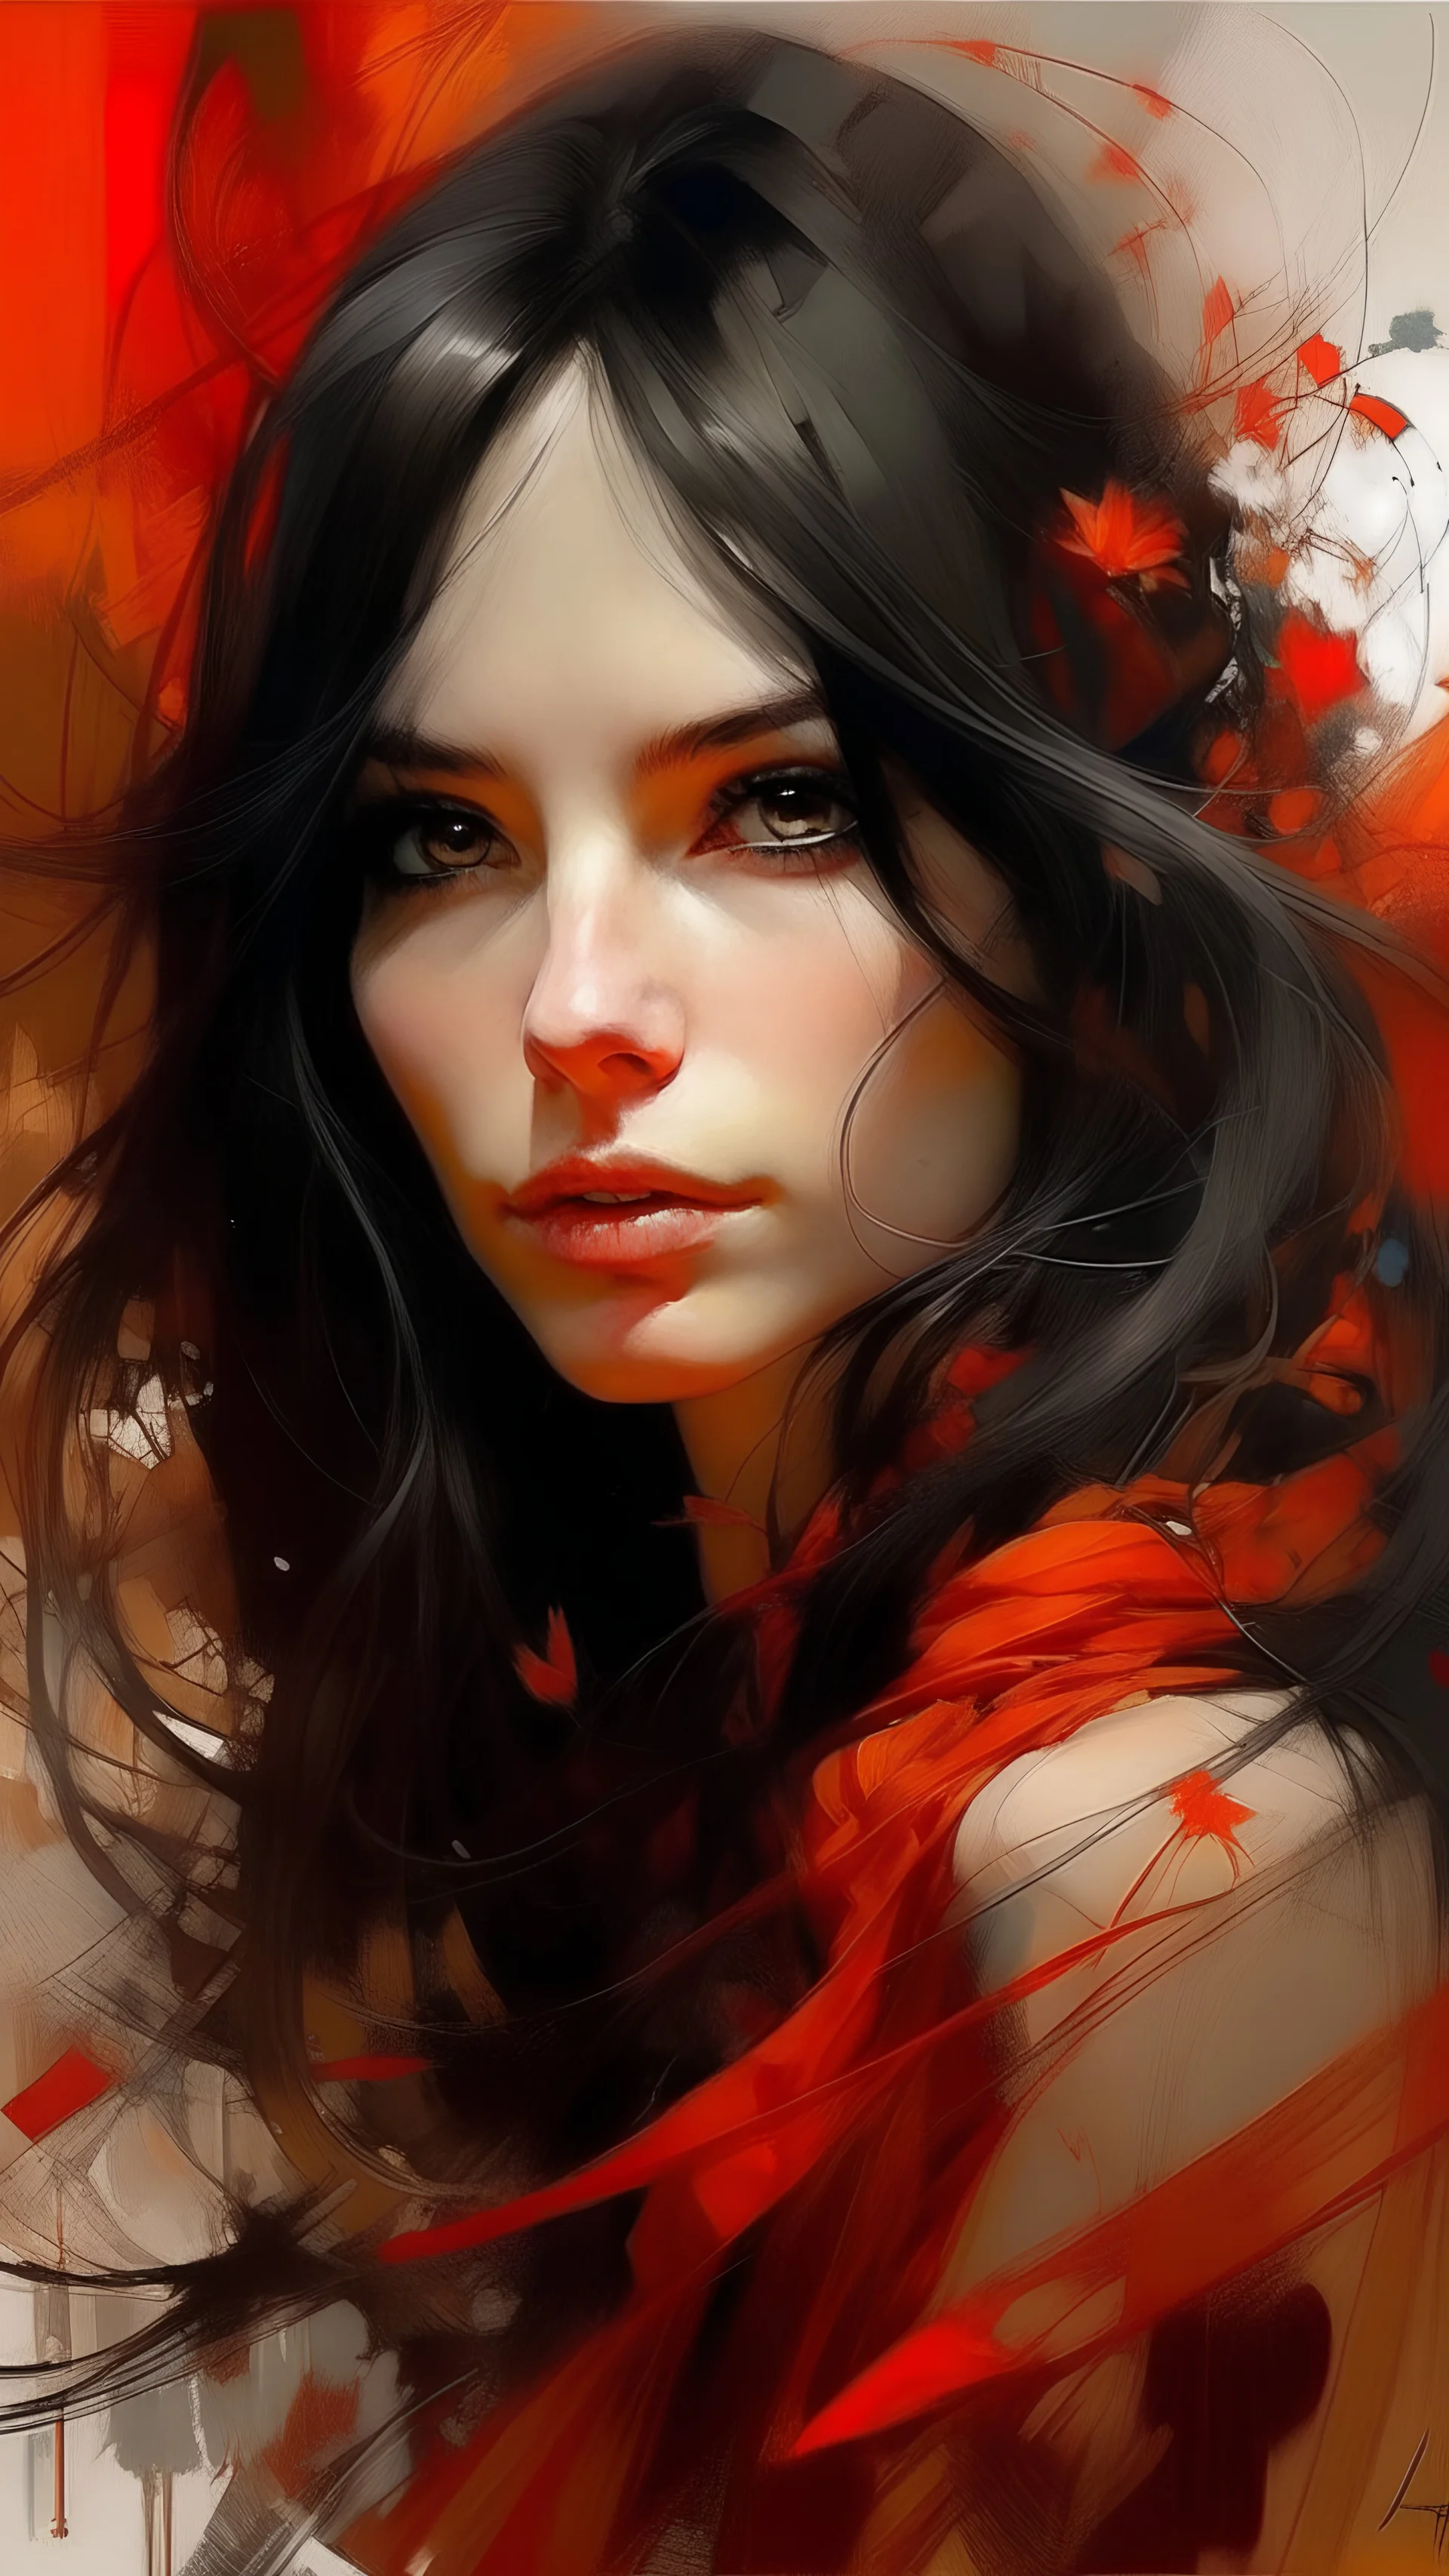 oil and airbrush painting portrait of a beautiful young woman with long black hair, hazel eyes, cute thin lips, in orange and red artistic ambrodery saree, art by Greg Rutkowski, WLOP, Alphonse Mucha, Louis Royo, Frank Frazetta, Jeremy Mann and Russ Mills